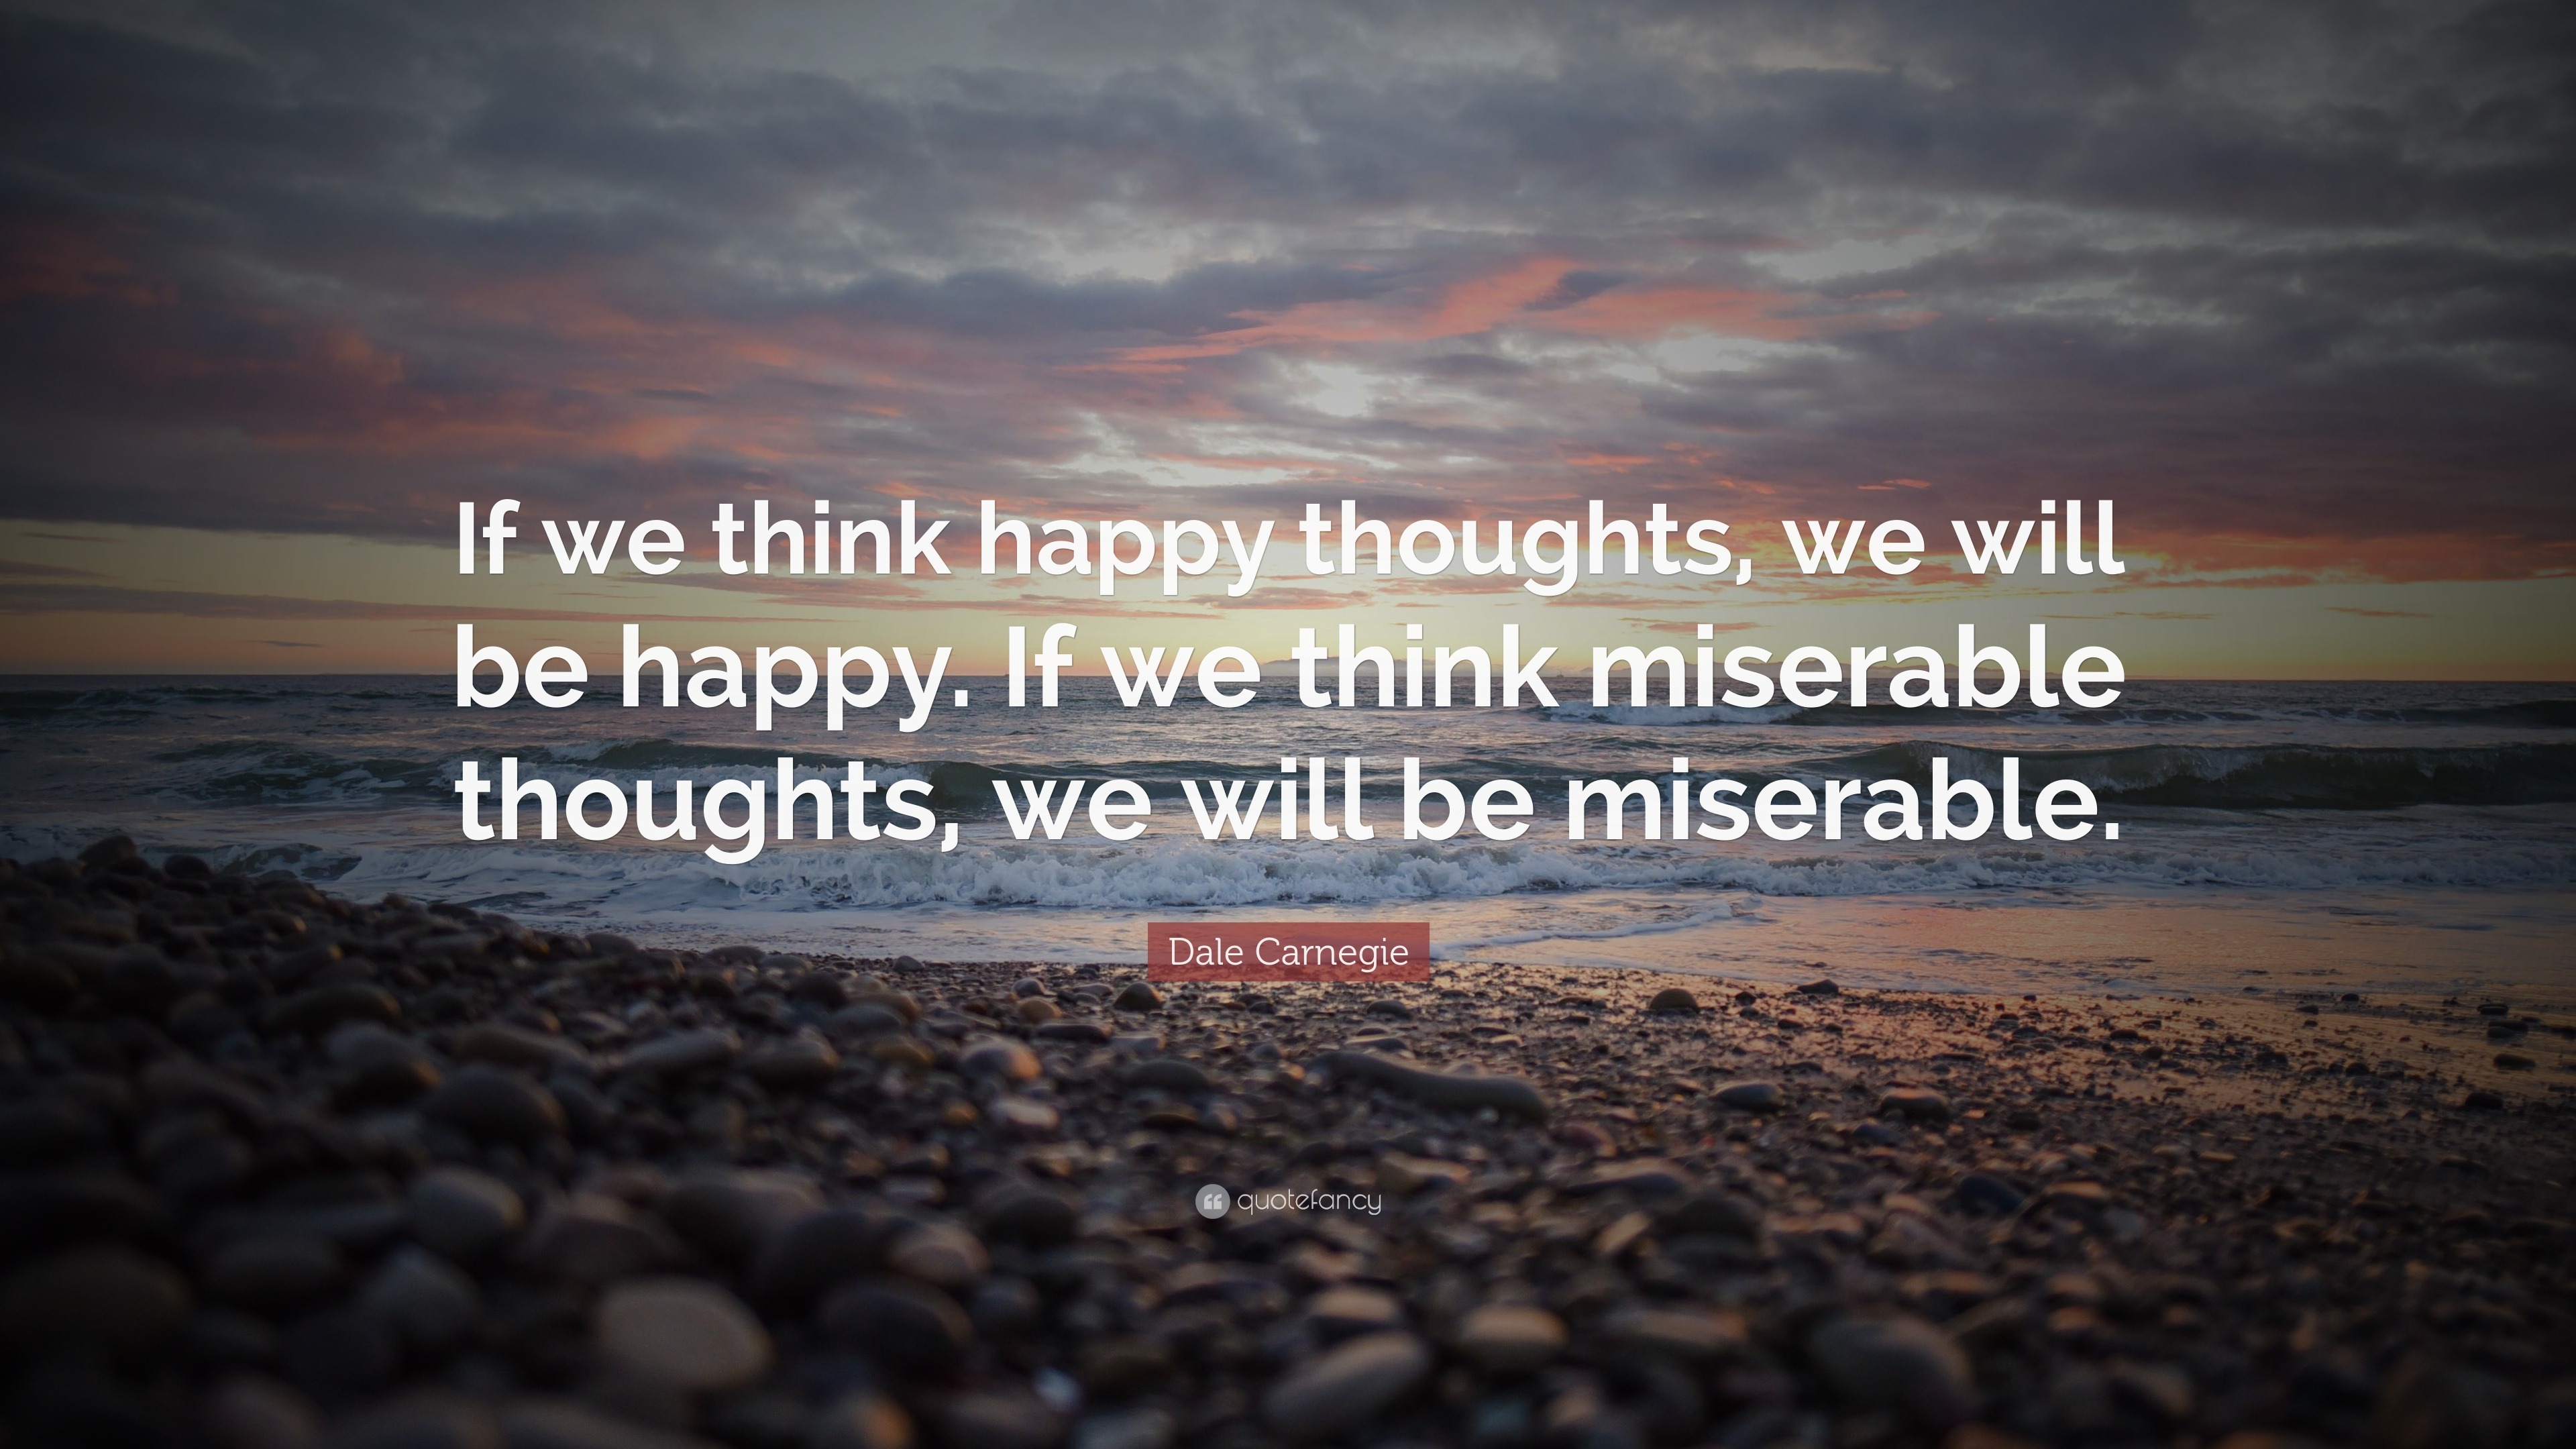 Dale Carnegie Quote If We Think Happy Thoughts We Will Be Happy If We Think Miserable